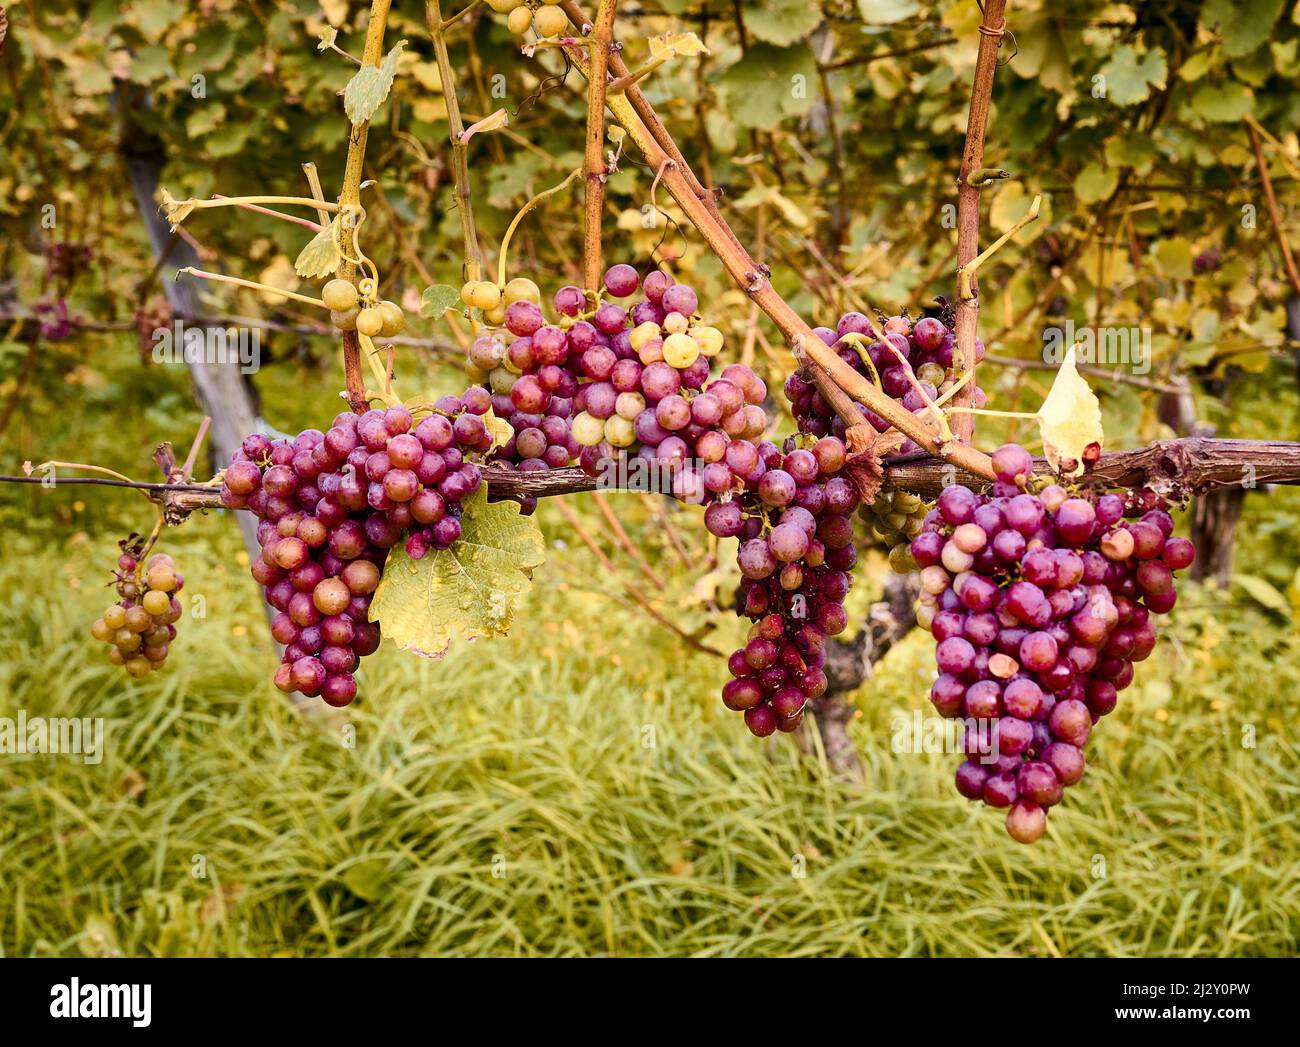 Pinot Noir grapes waiting to be harvested, Bad Honnef, North Rhine-Westphalia, Germany Stock Photo